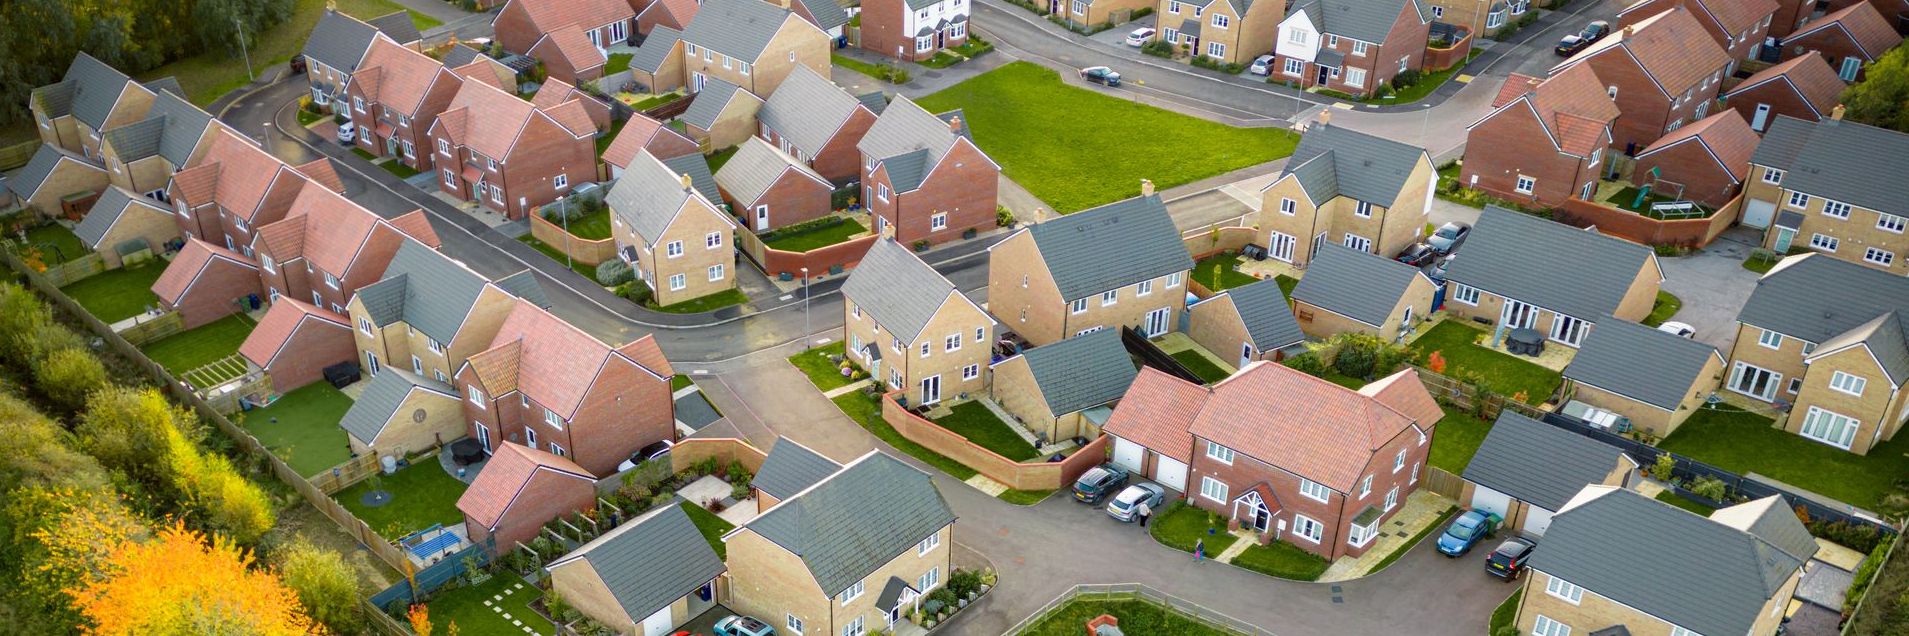 Residential Leasehold Deeds of Variation - Key Practice Points for Conveyancers